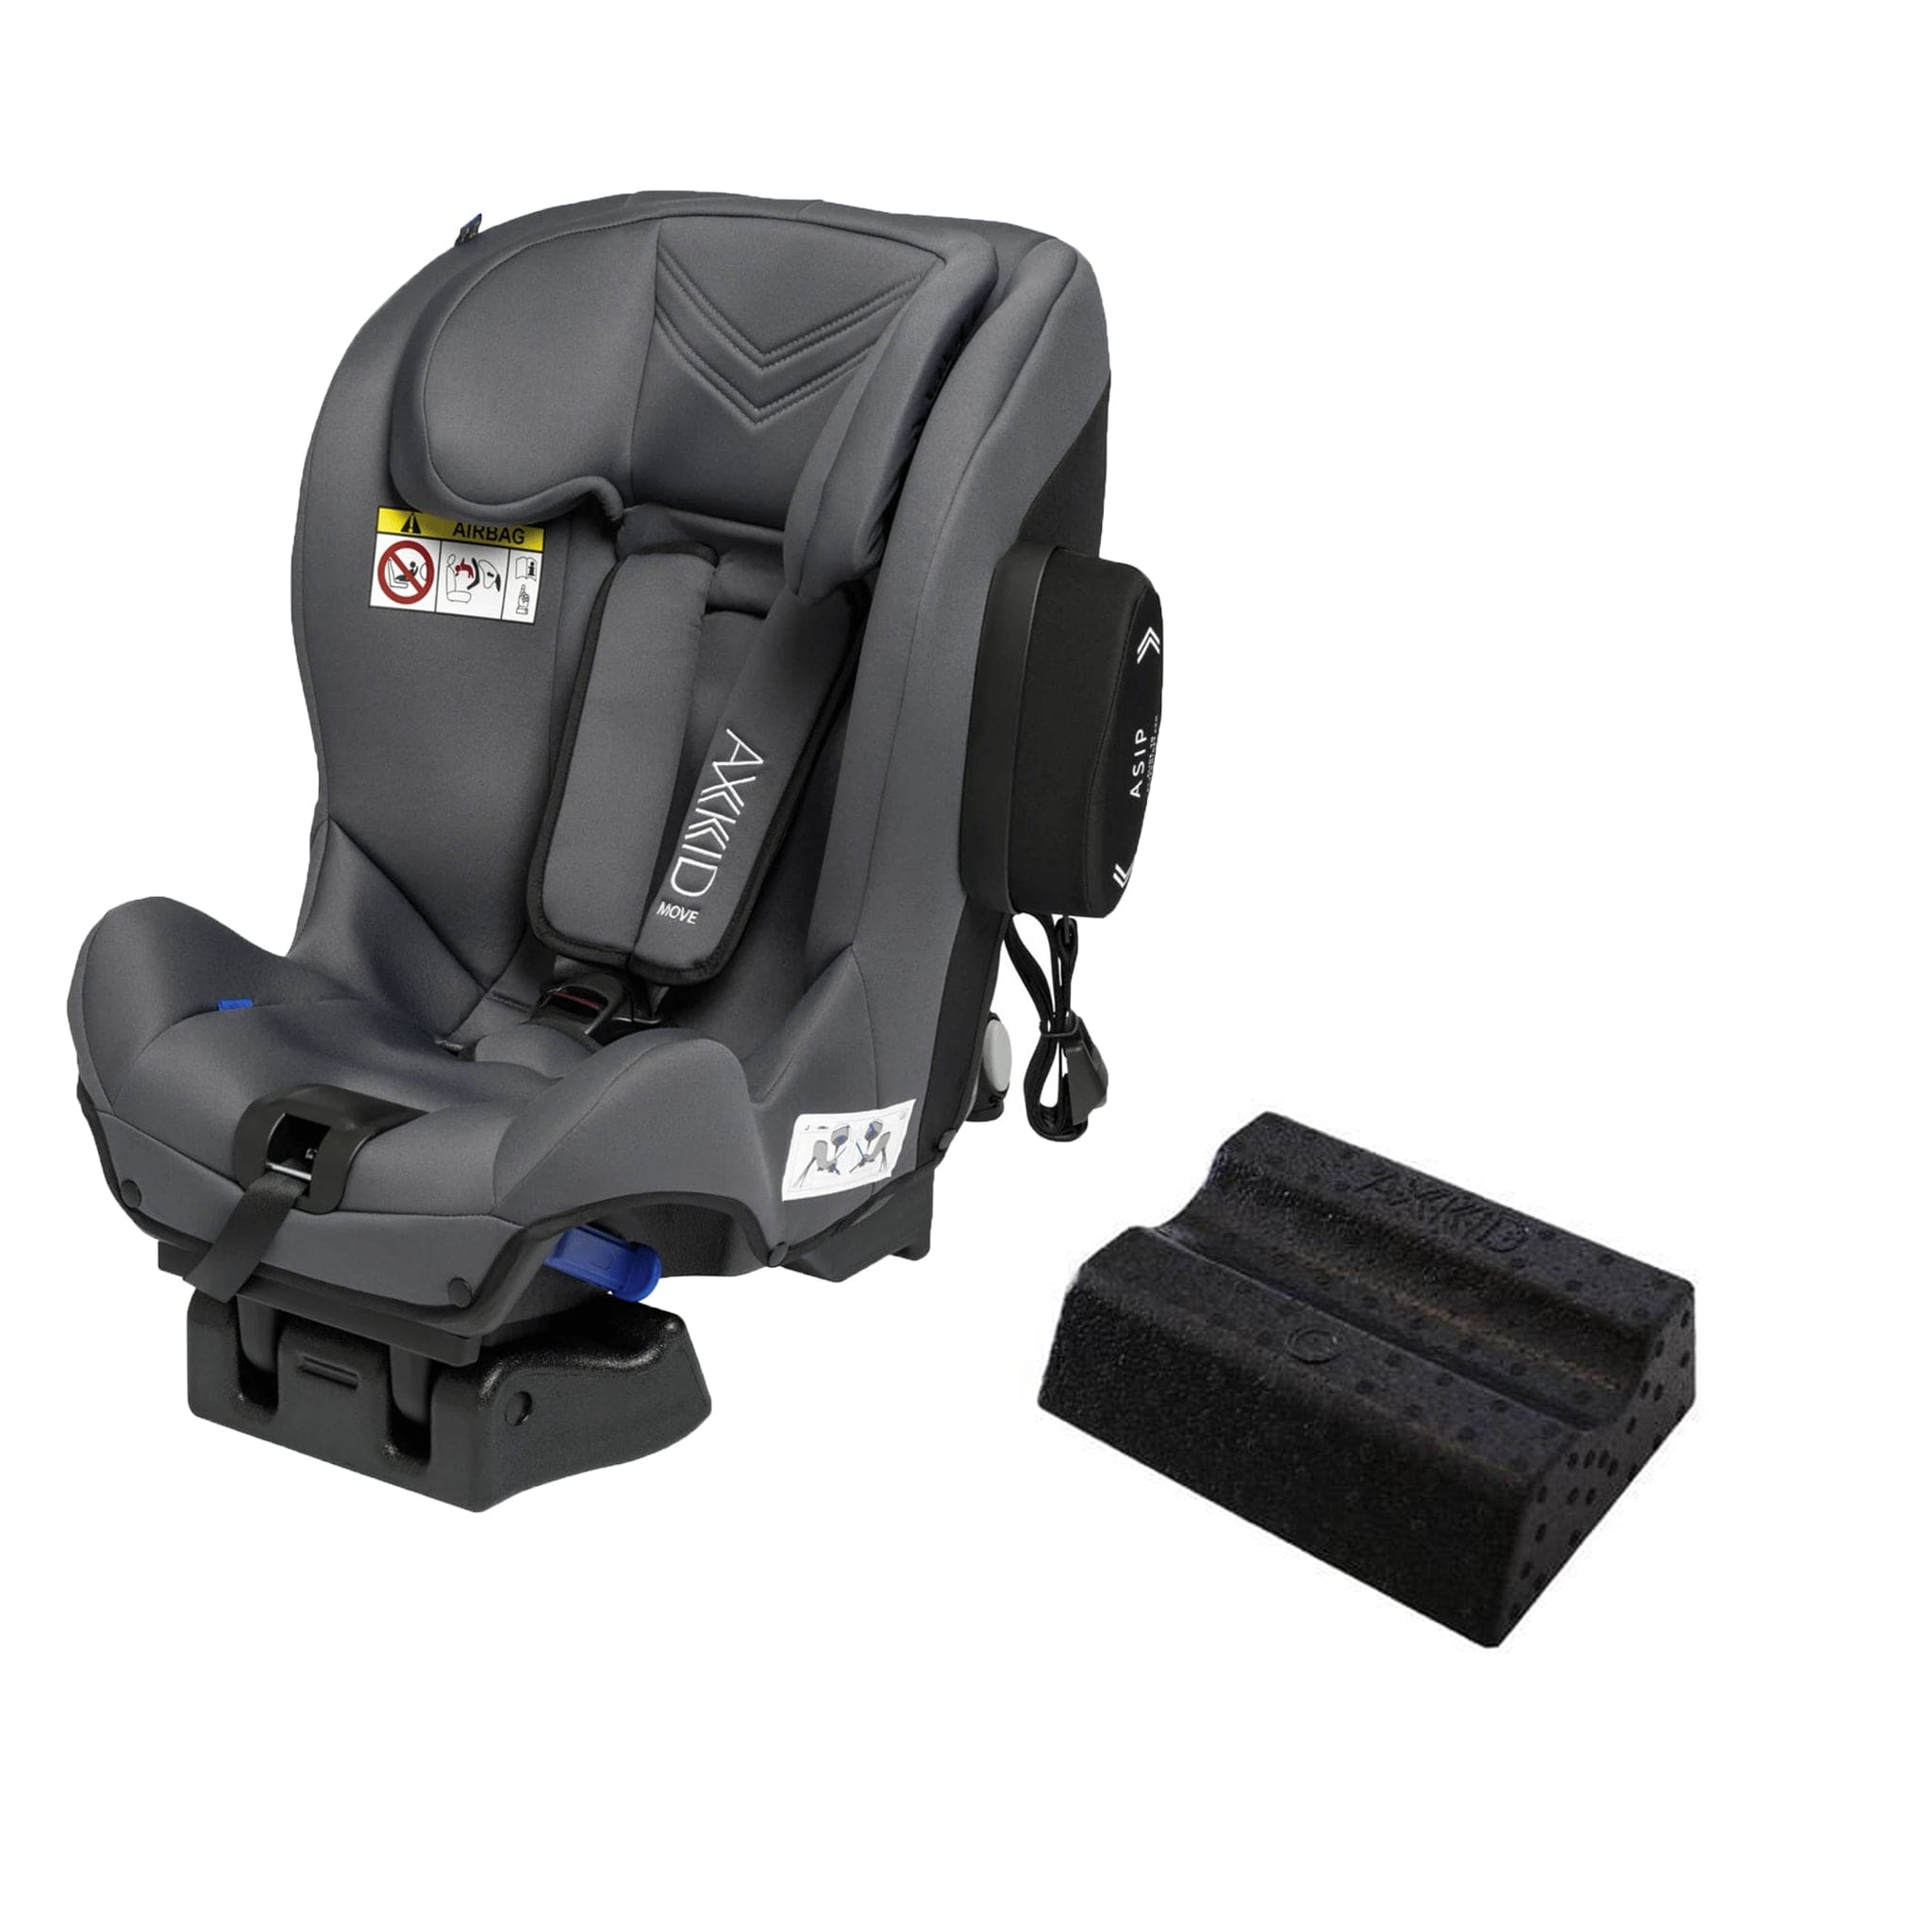 Axkid rear facing car seats Axkid Move Car Seat with free accessory - Granite MOV-GRA-WED